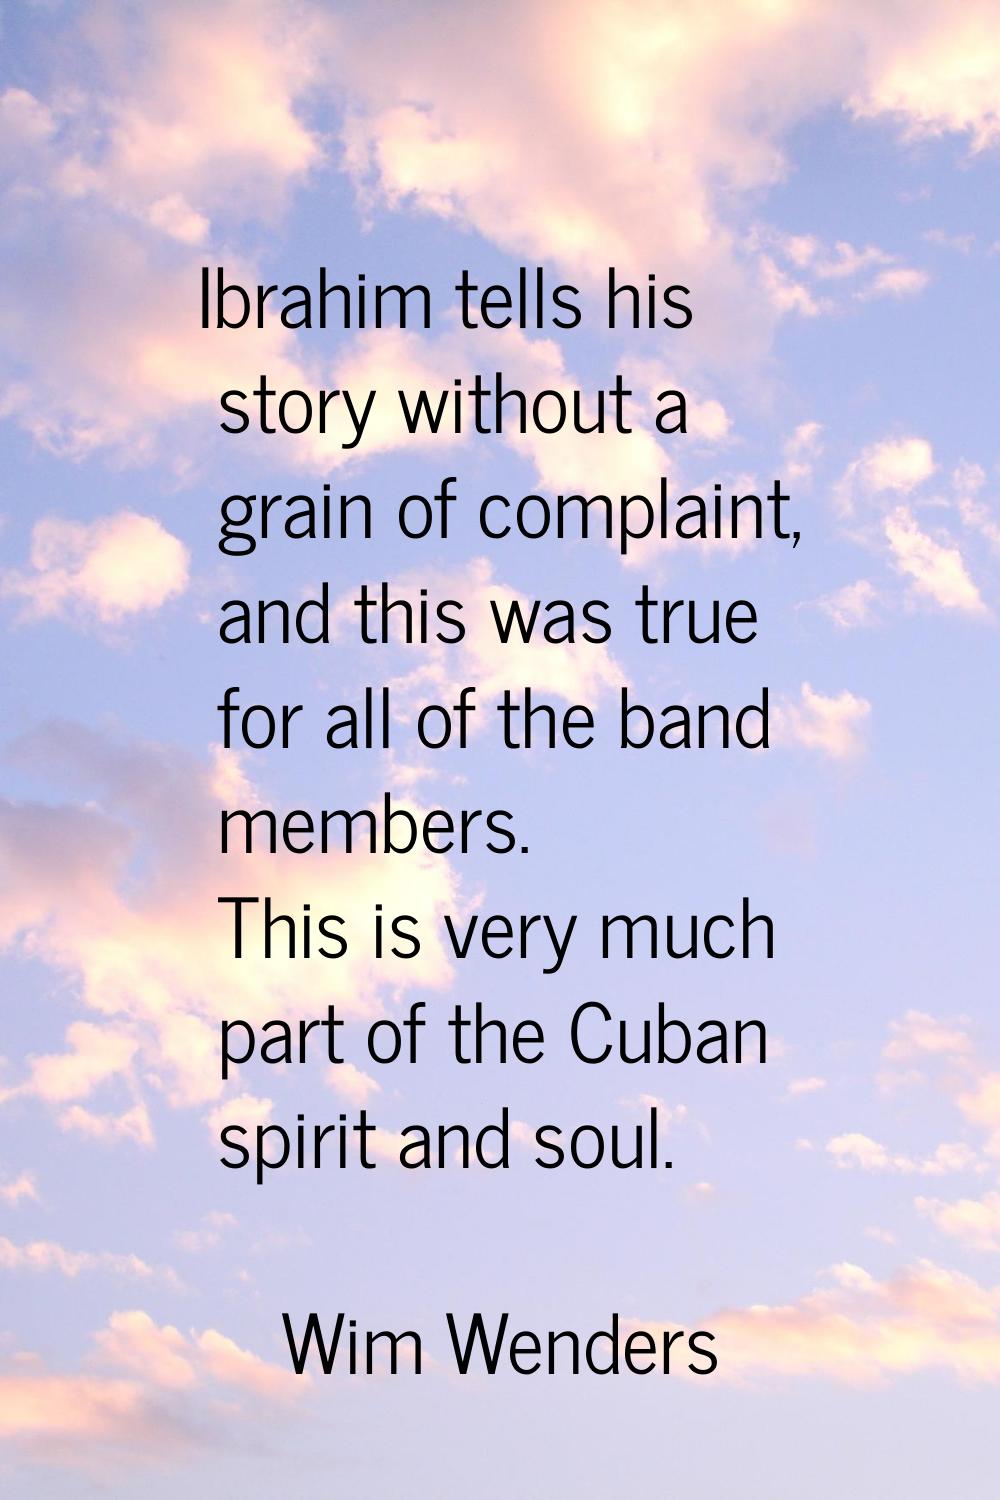 Ibrahim tells his story without a grain of complaint, and this was true for all of the band members